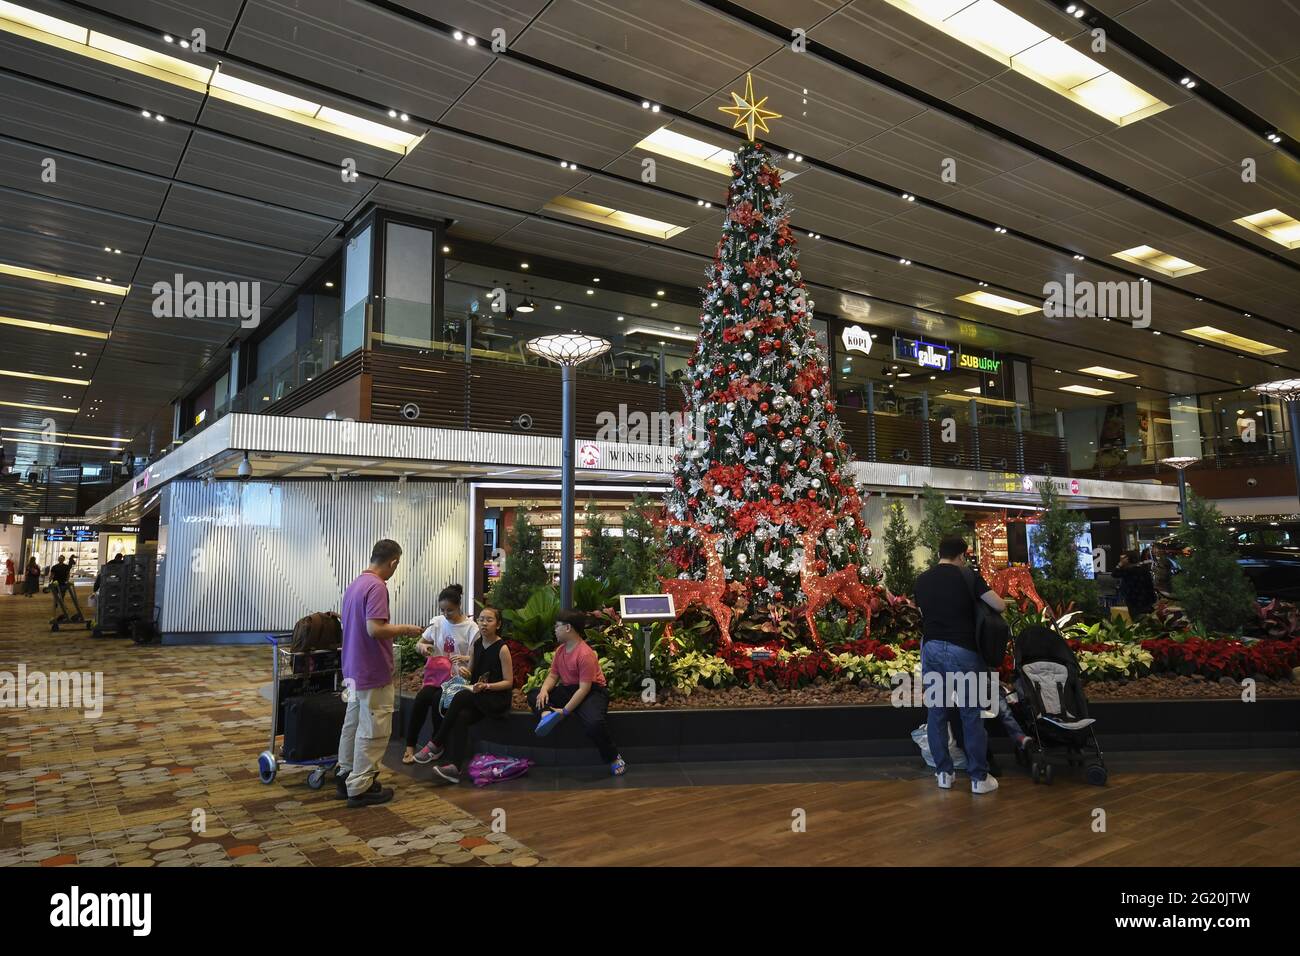 SINGAPORE, SINGAPORE - Dec 13, 2019: Singapore- 23 Nov, 2019: Singapore Changi Airport architecture and passengers. Changi Airport is one of the large Stock Photo